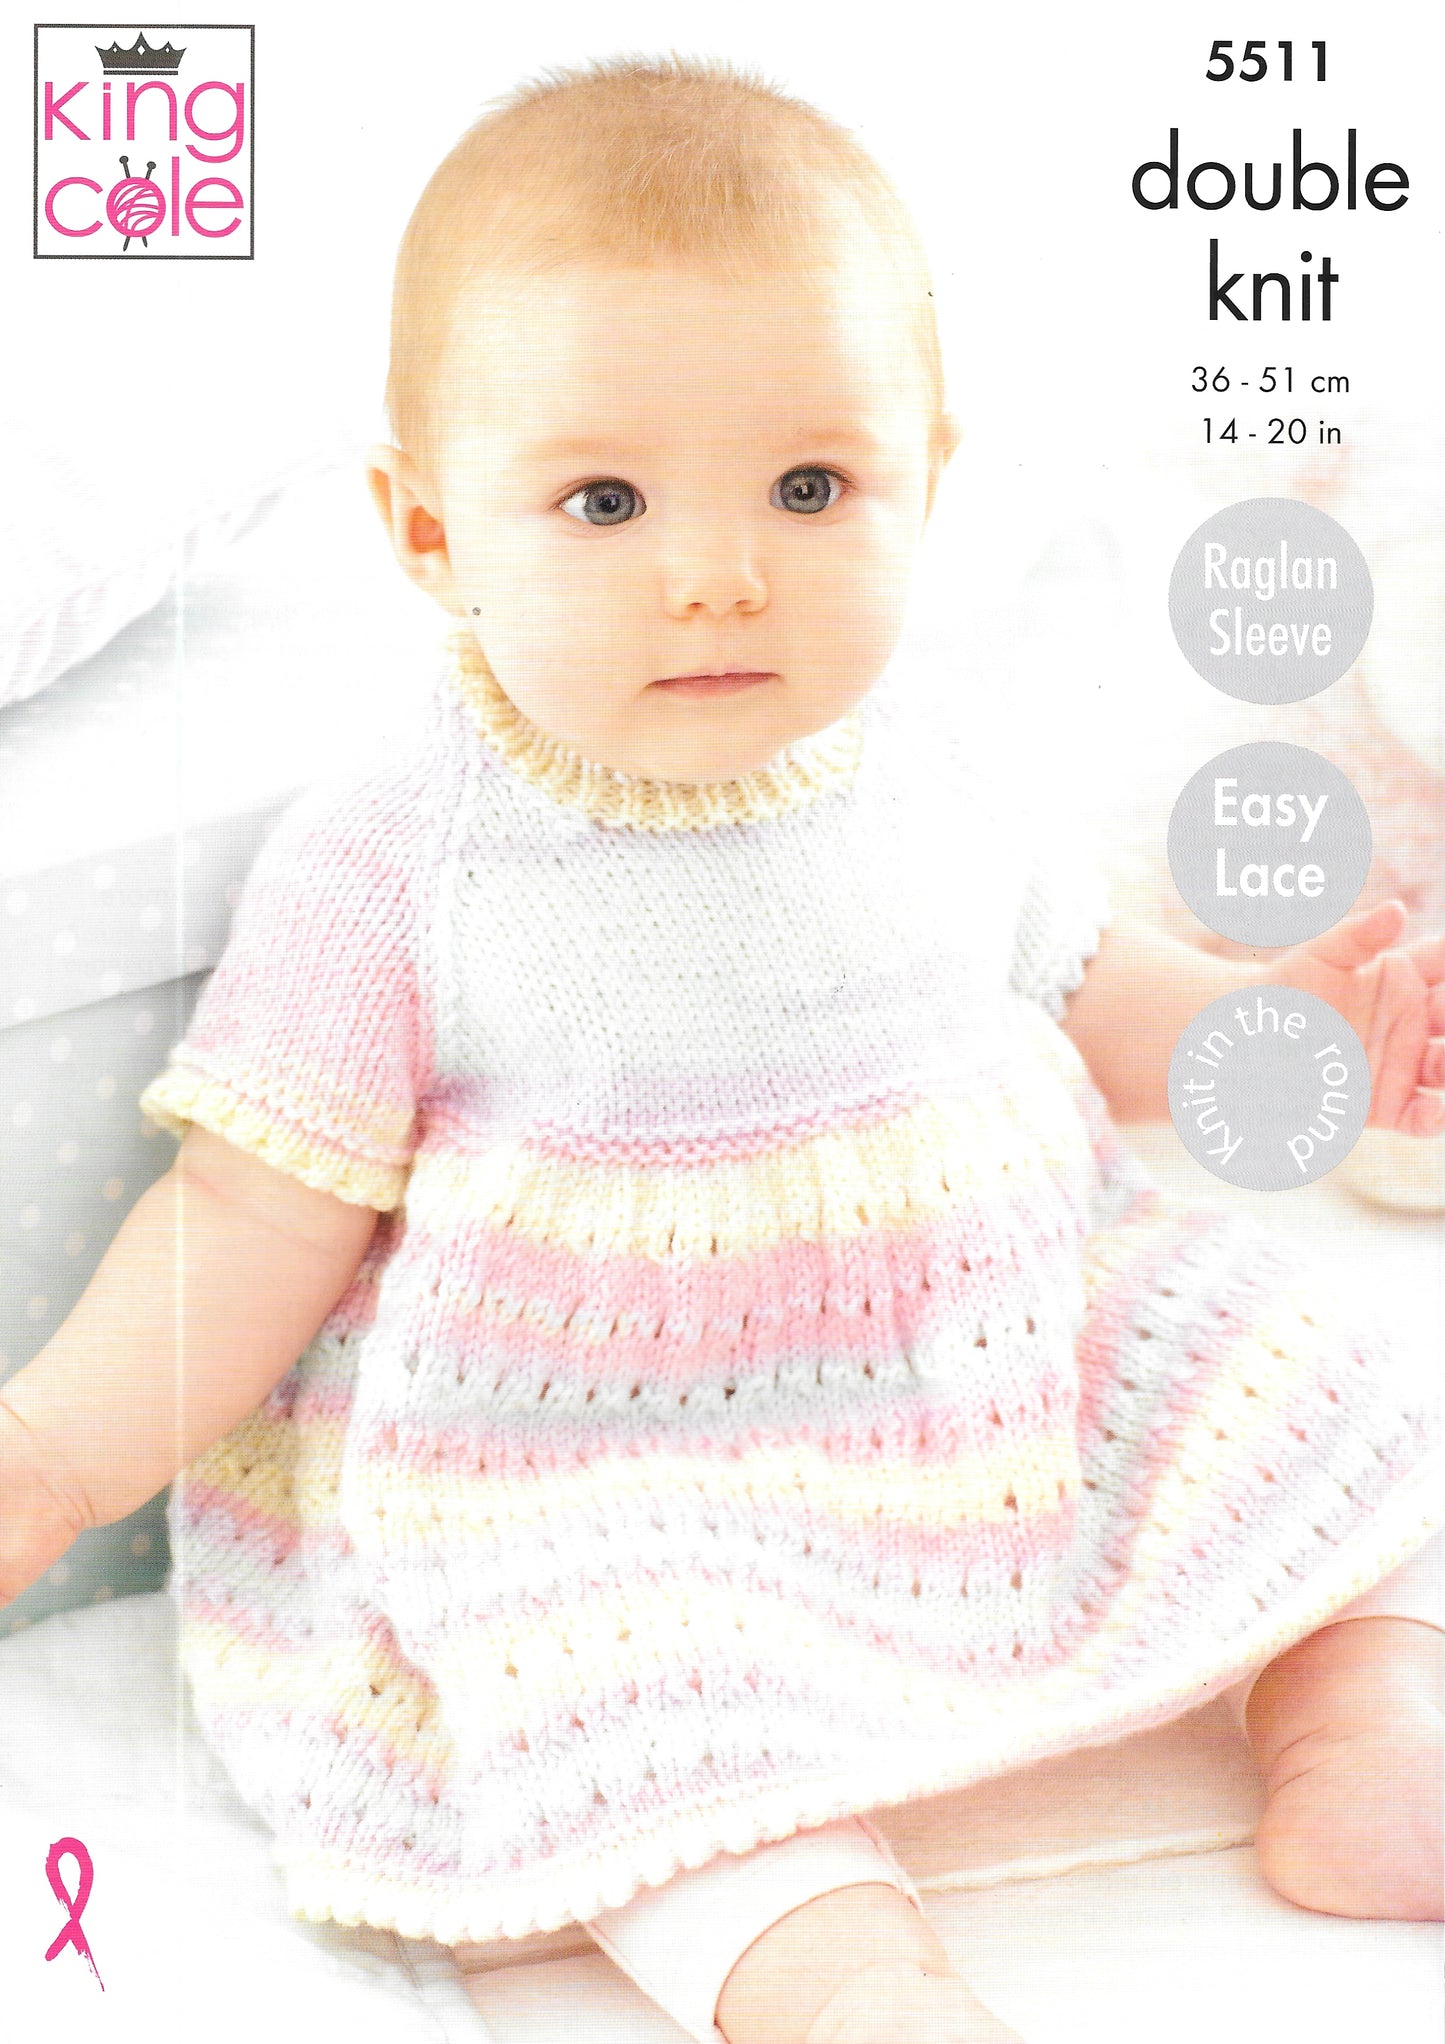 5511 King Cole double knit Dress/Matinee Coat and Blanket knitting pattern